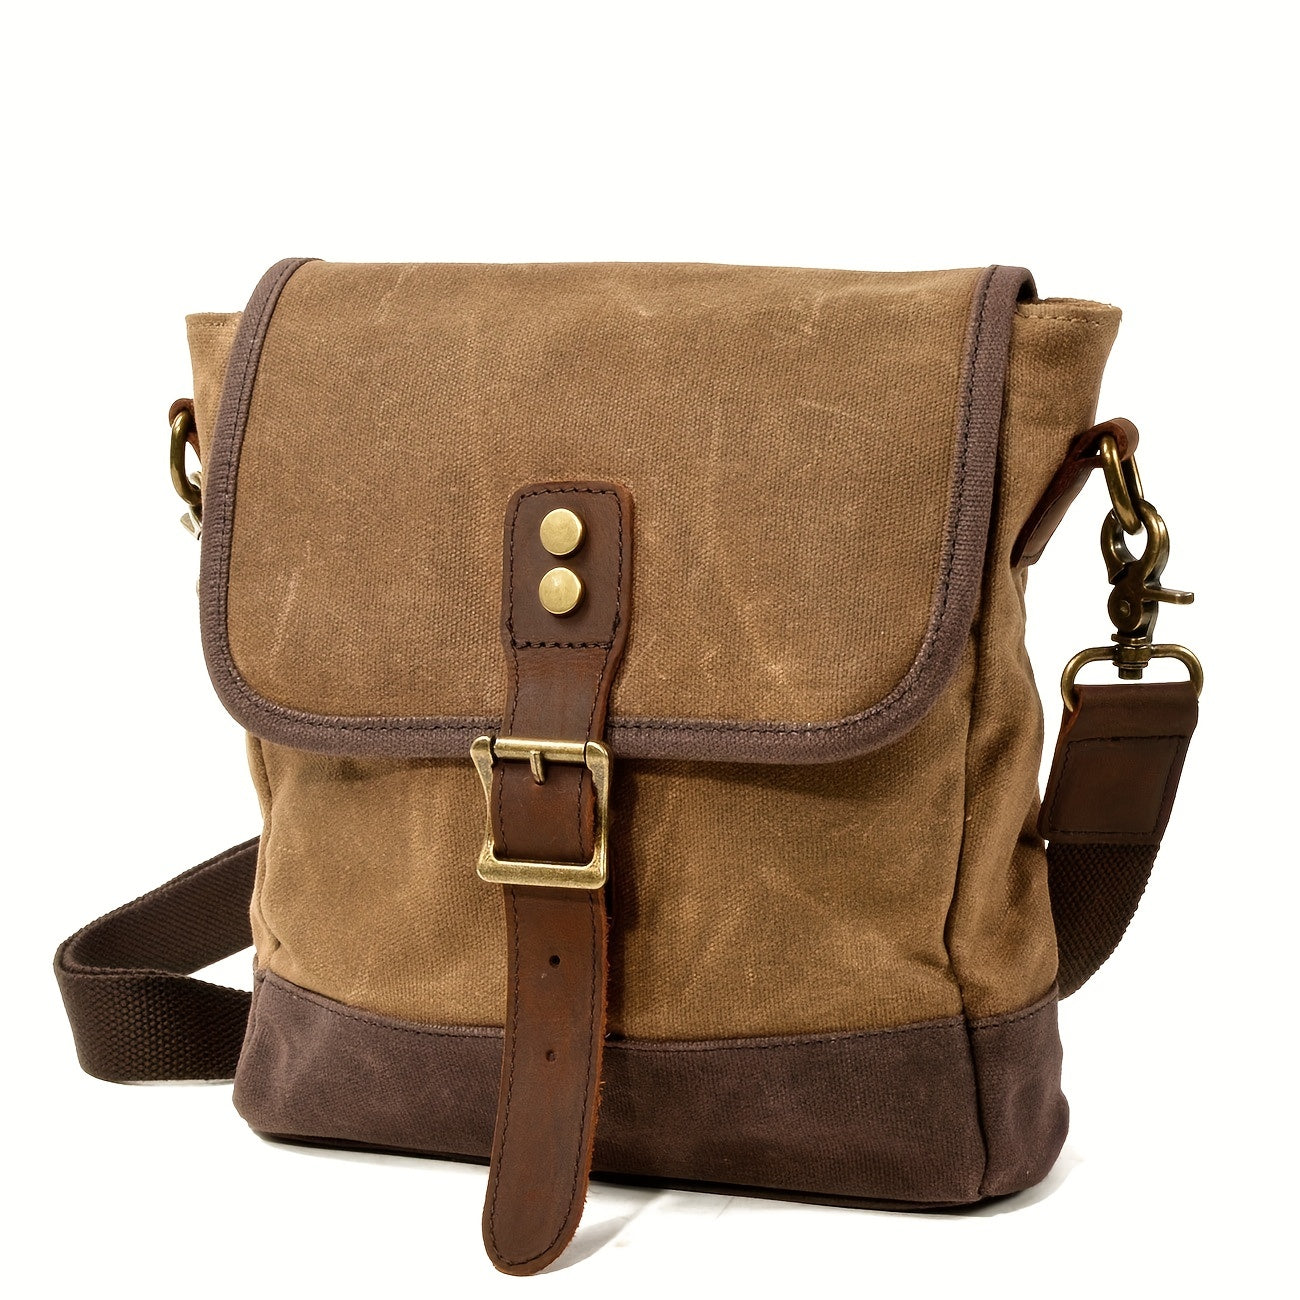 Men's New Fashion Crossbody Bag Shoulder Bag, Waxed Canvas With Leather Trim, Casual Outdoor Travel Bag